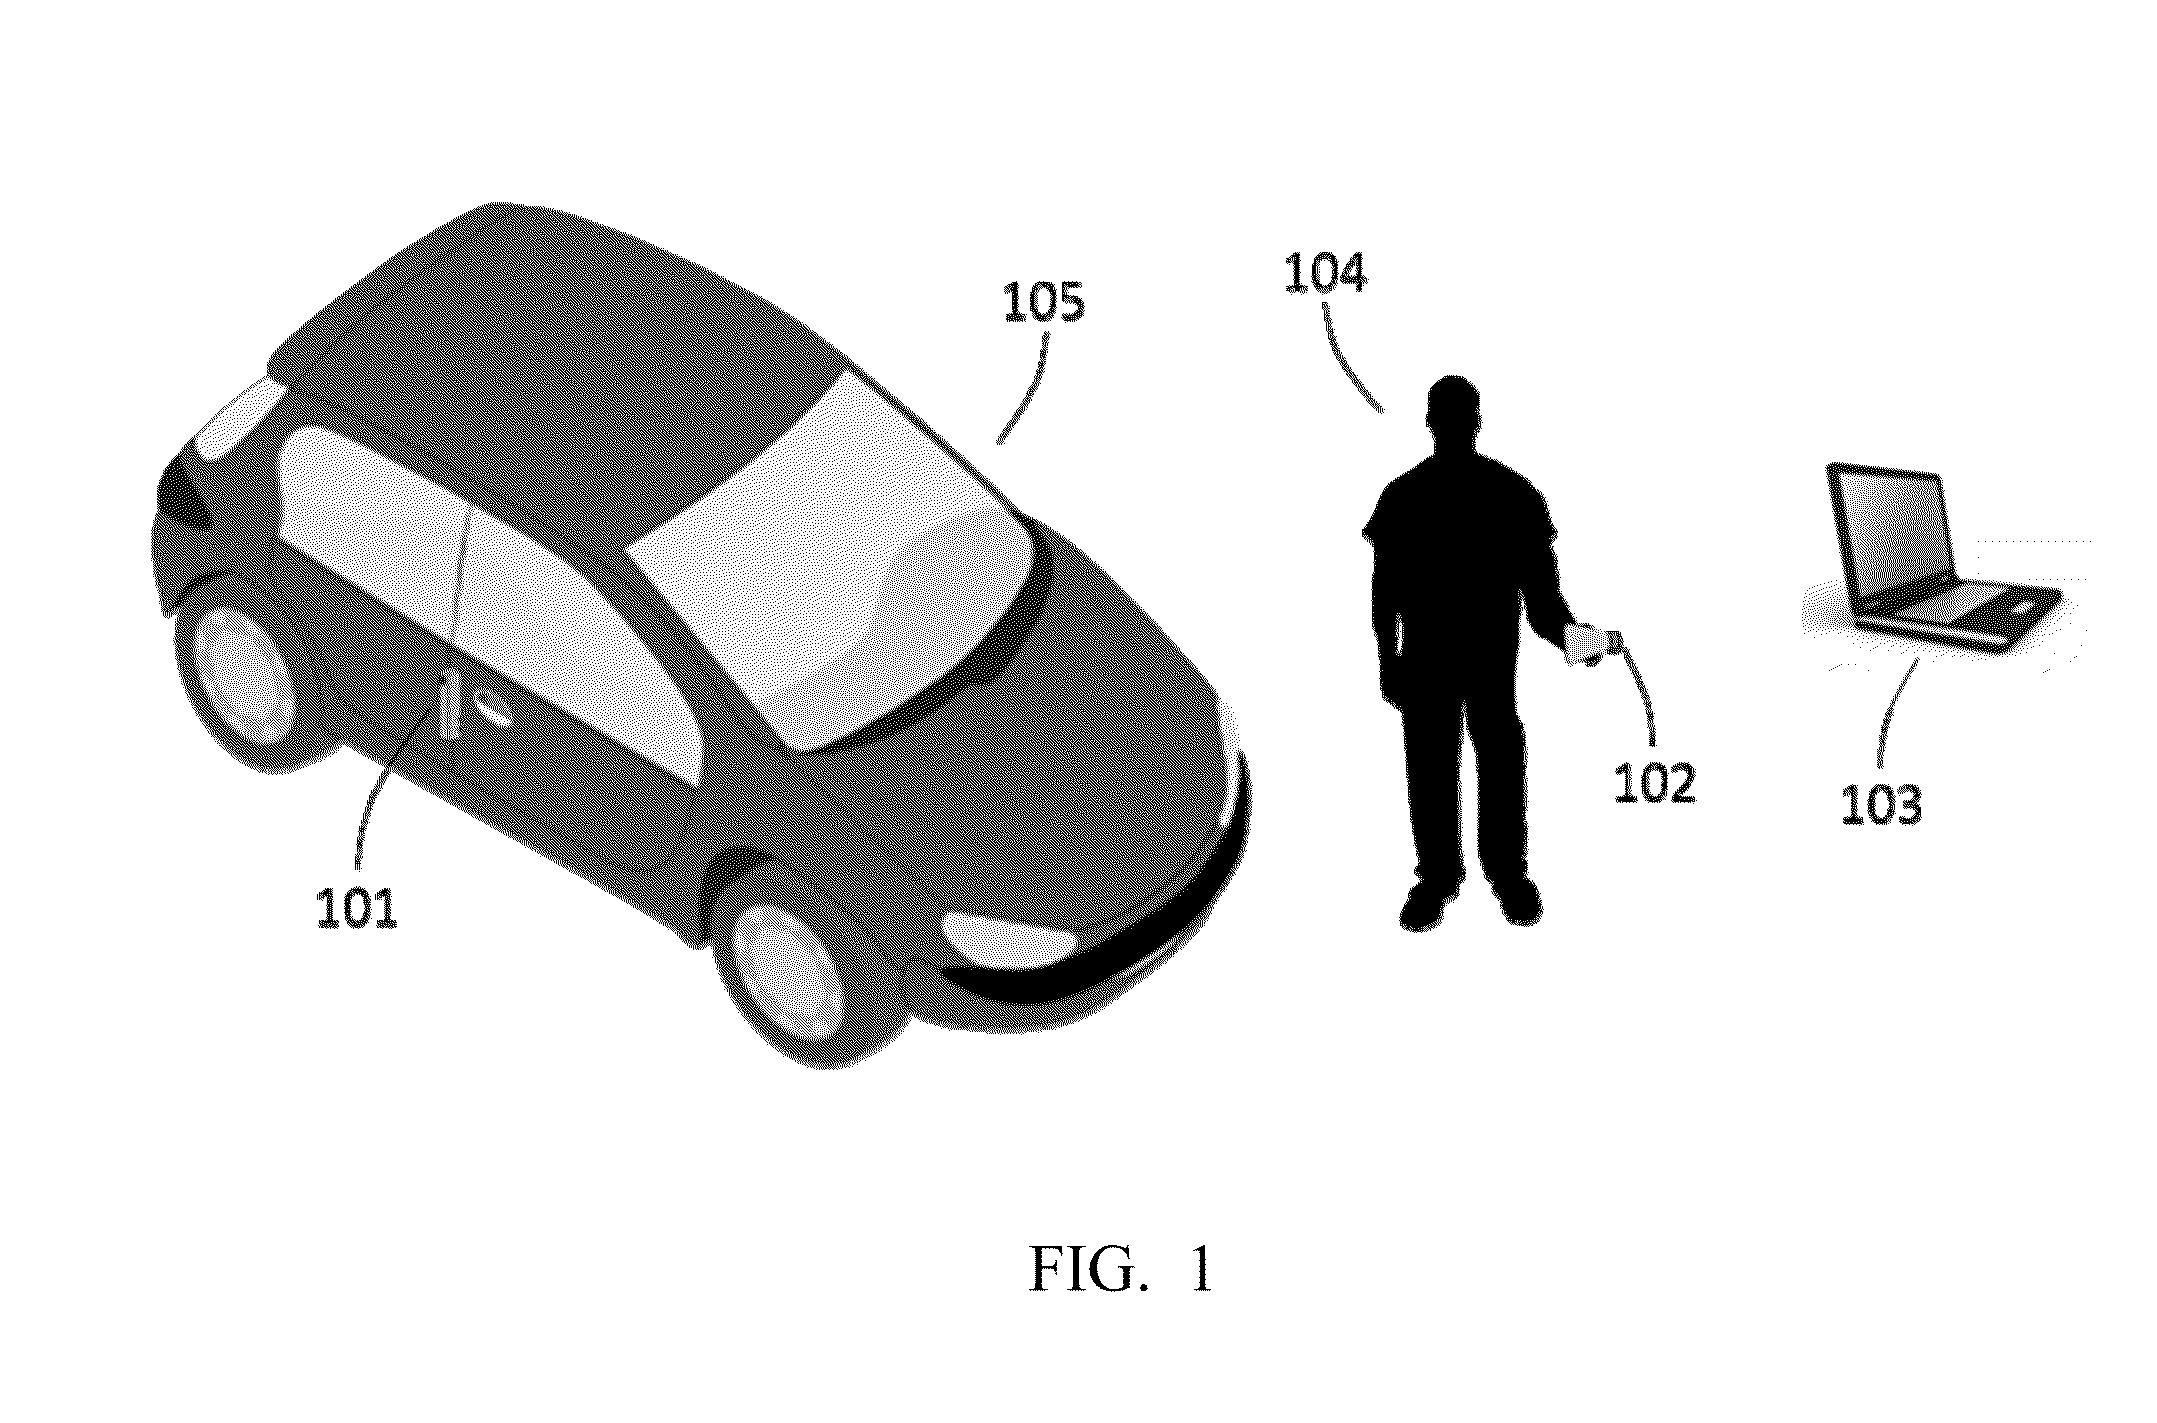 Externally-mounted apparatus and associated systems for controlling vehicle access